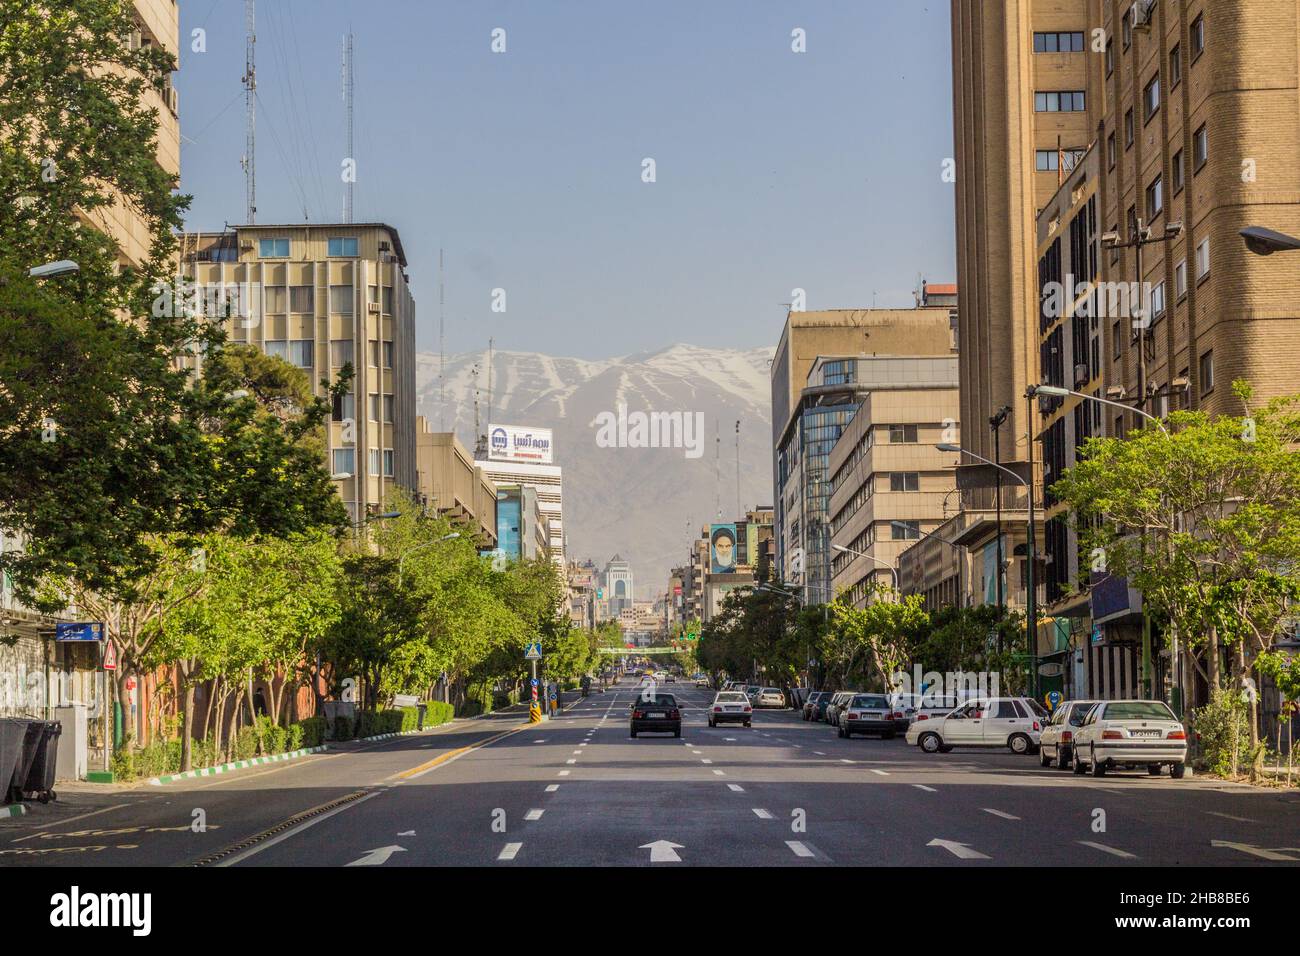 TEHRAN, IRAN - APRIL 2, 2018: Road in Tehran is empty because the end of Nowruz celebrations. Stock Photo